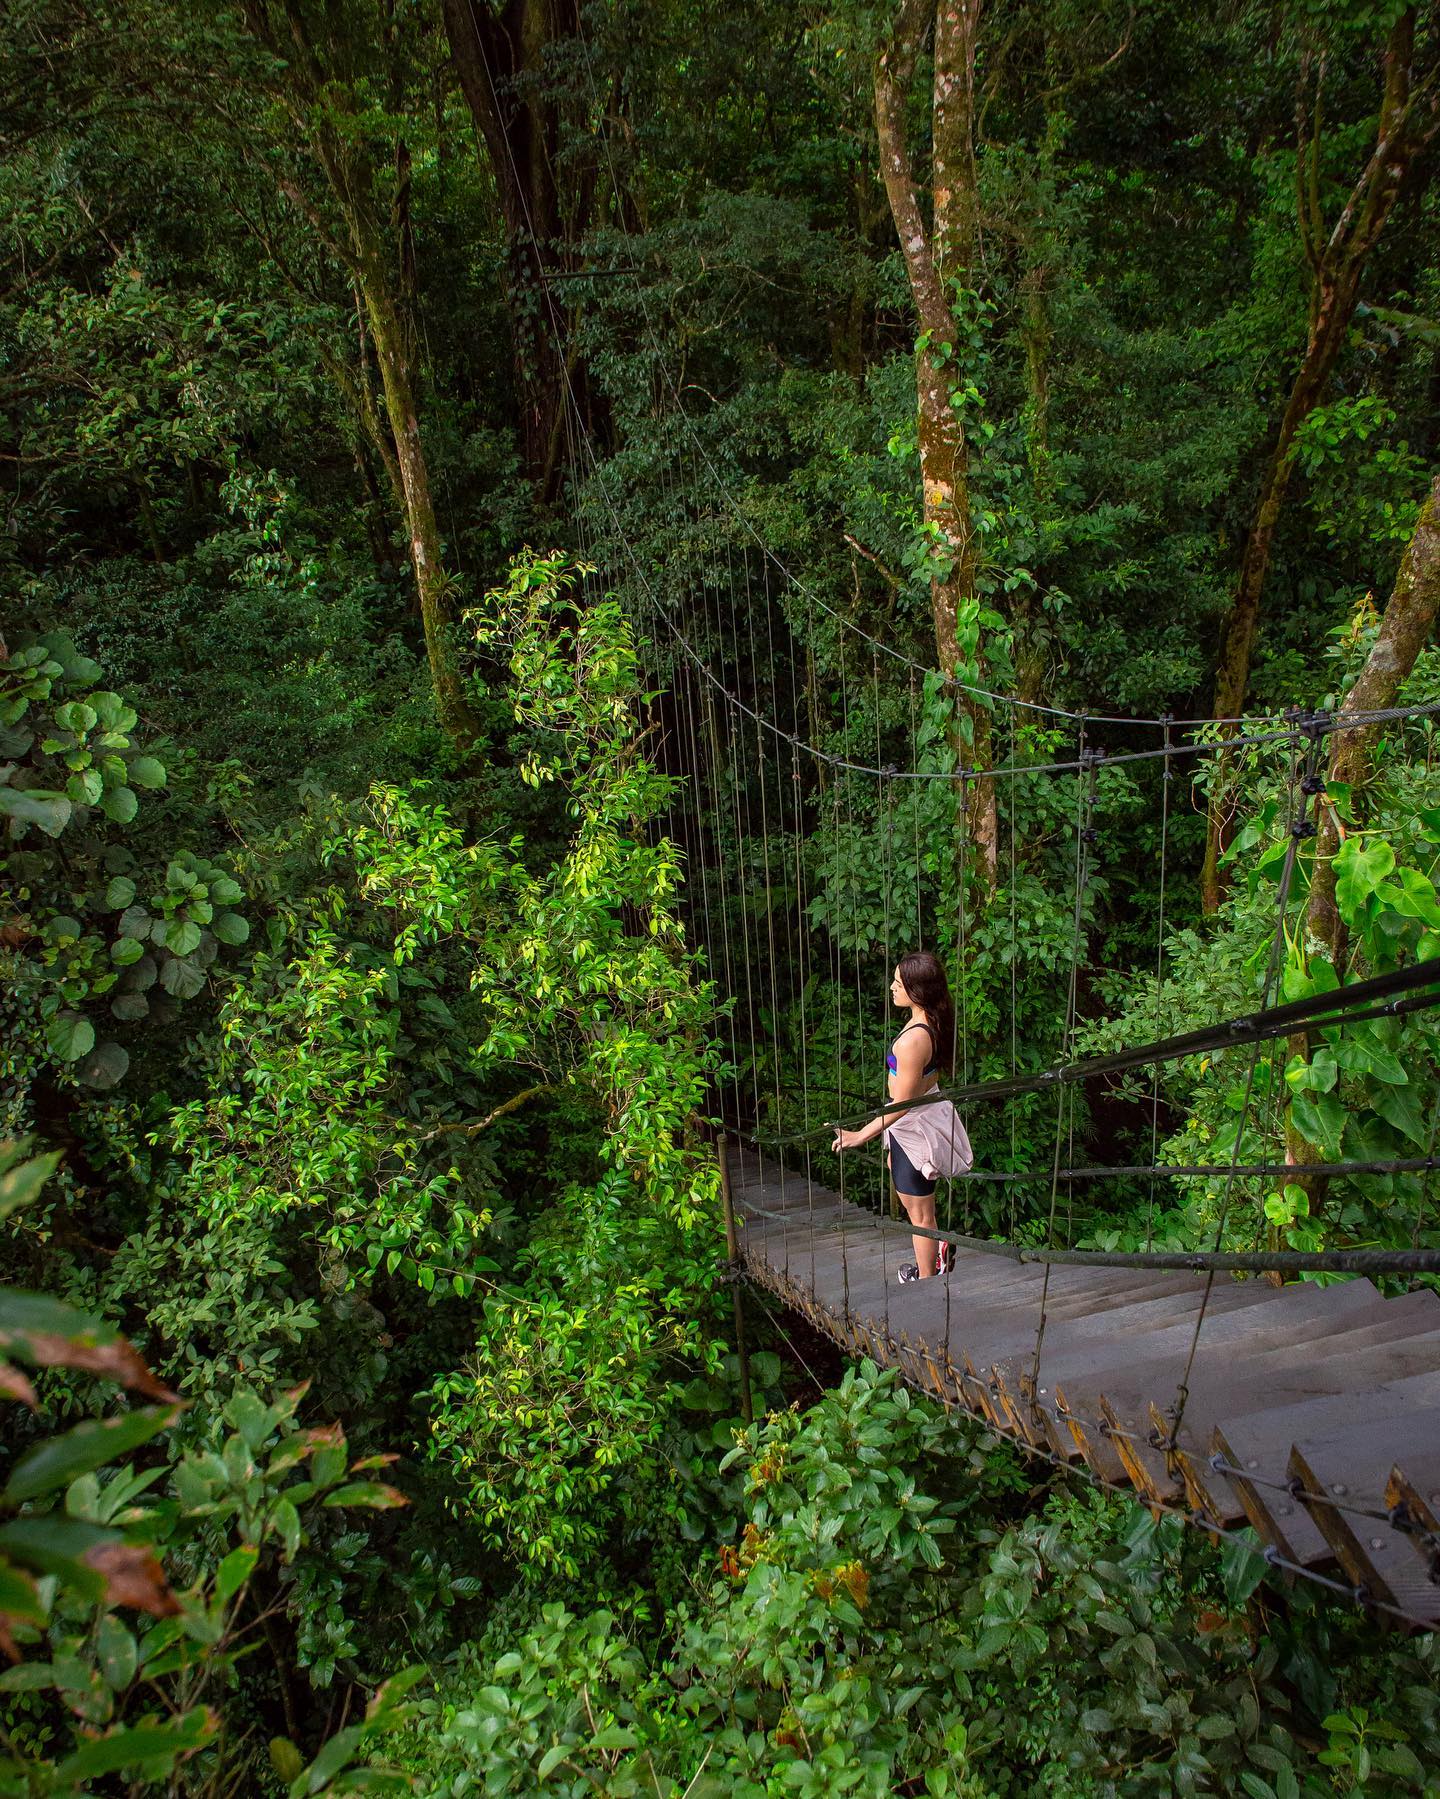 Enjoy the tropical rainforest from above!
.
Experience Sensoria for an unforgettable adventure!
.
Reserve your visit today at www.sensoria.cr or via WhatsApp at +506 8955-4971.
.
#experiencesensoria
.
#costarica #visitcostarica #sustainabletravel #sustainability #tropical #rainforest #jungle #sustainabletourism #hiking #thisiscostarica #sensoria  #travel #luxury #costarica #thermalpools #wellness #wellnestravel